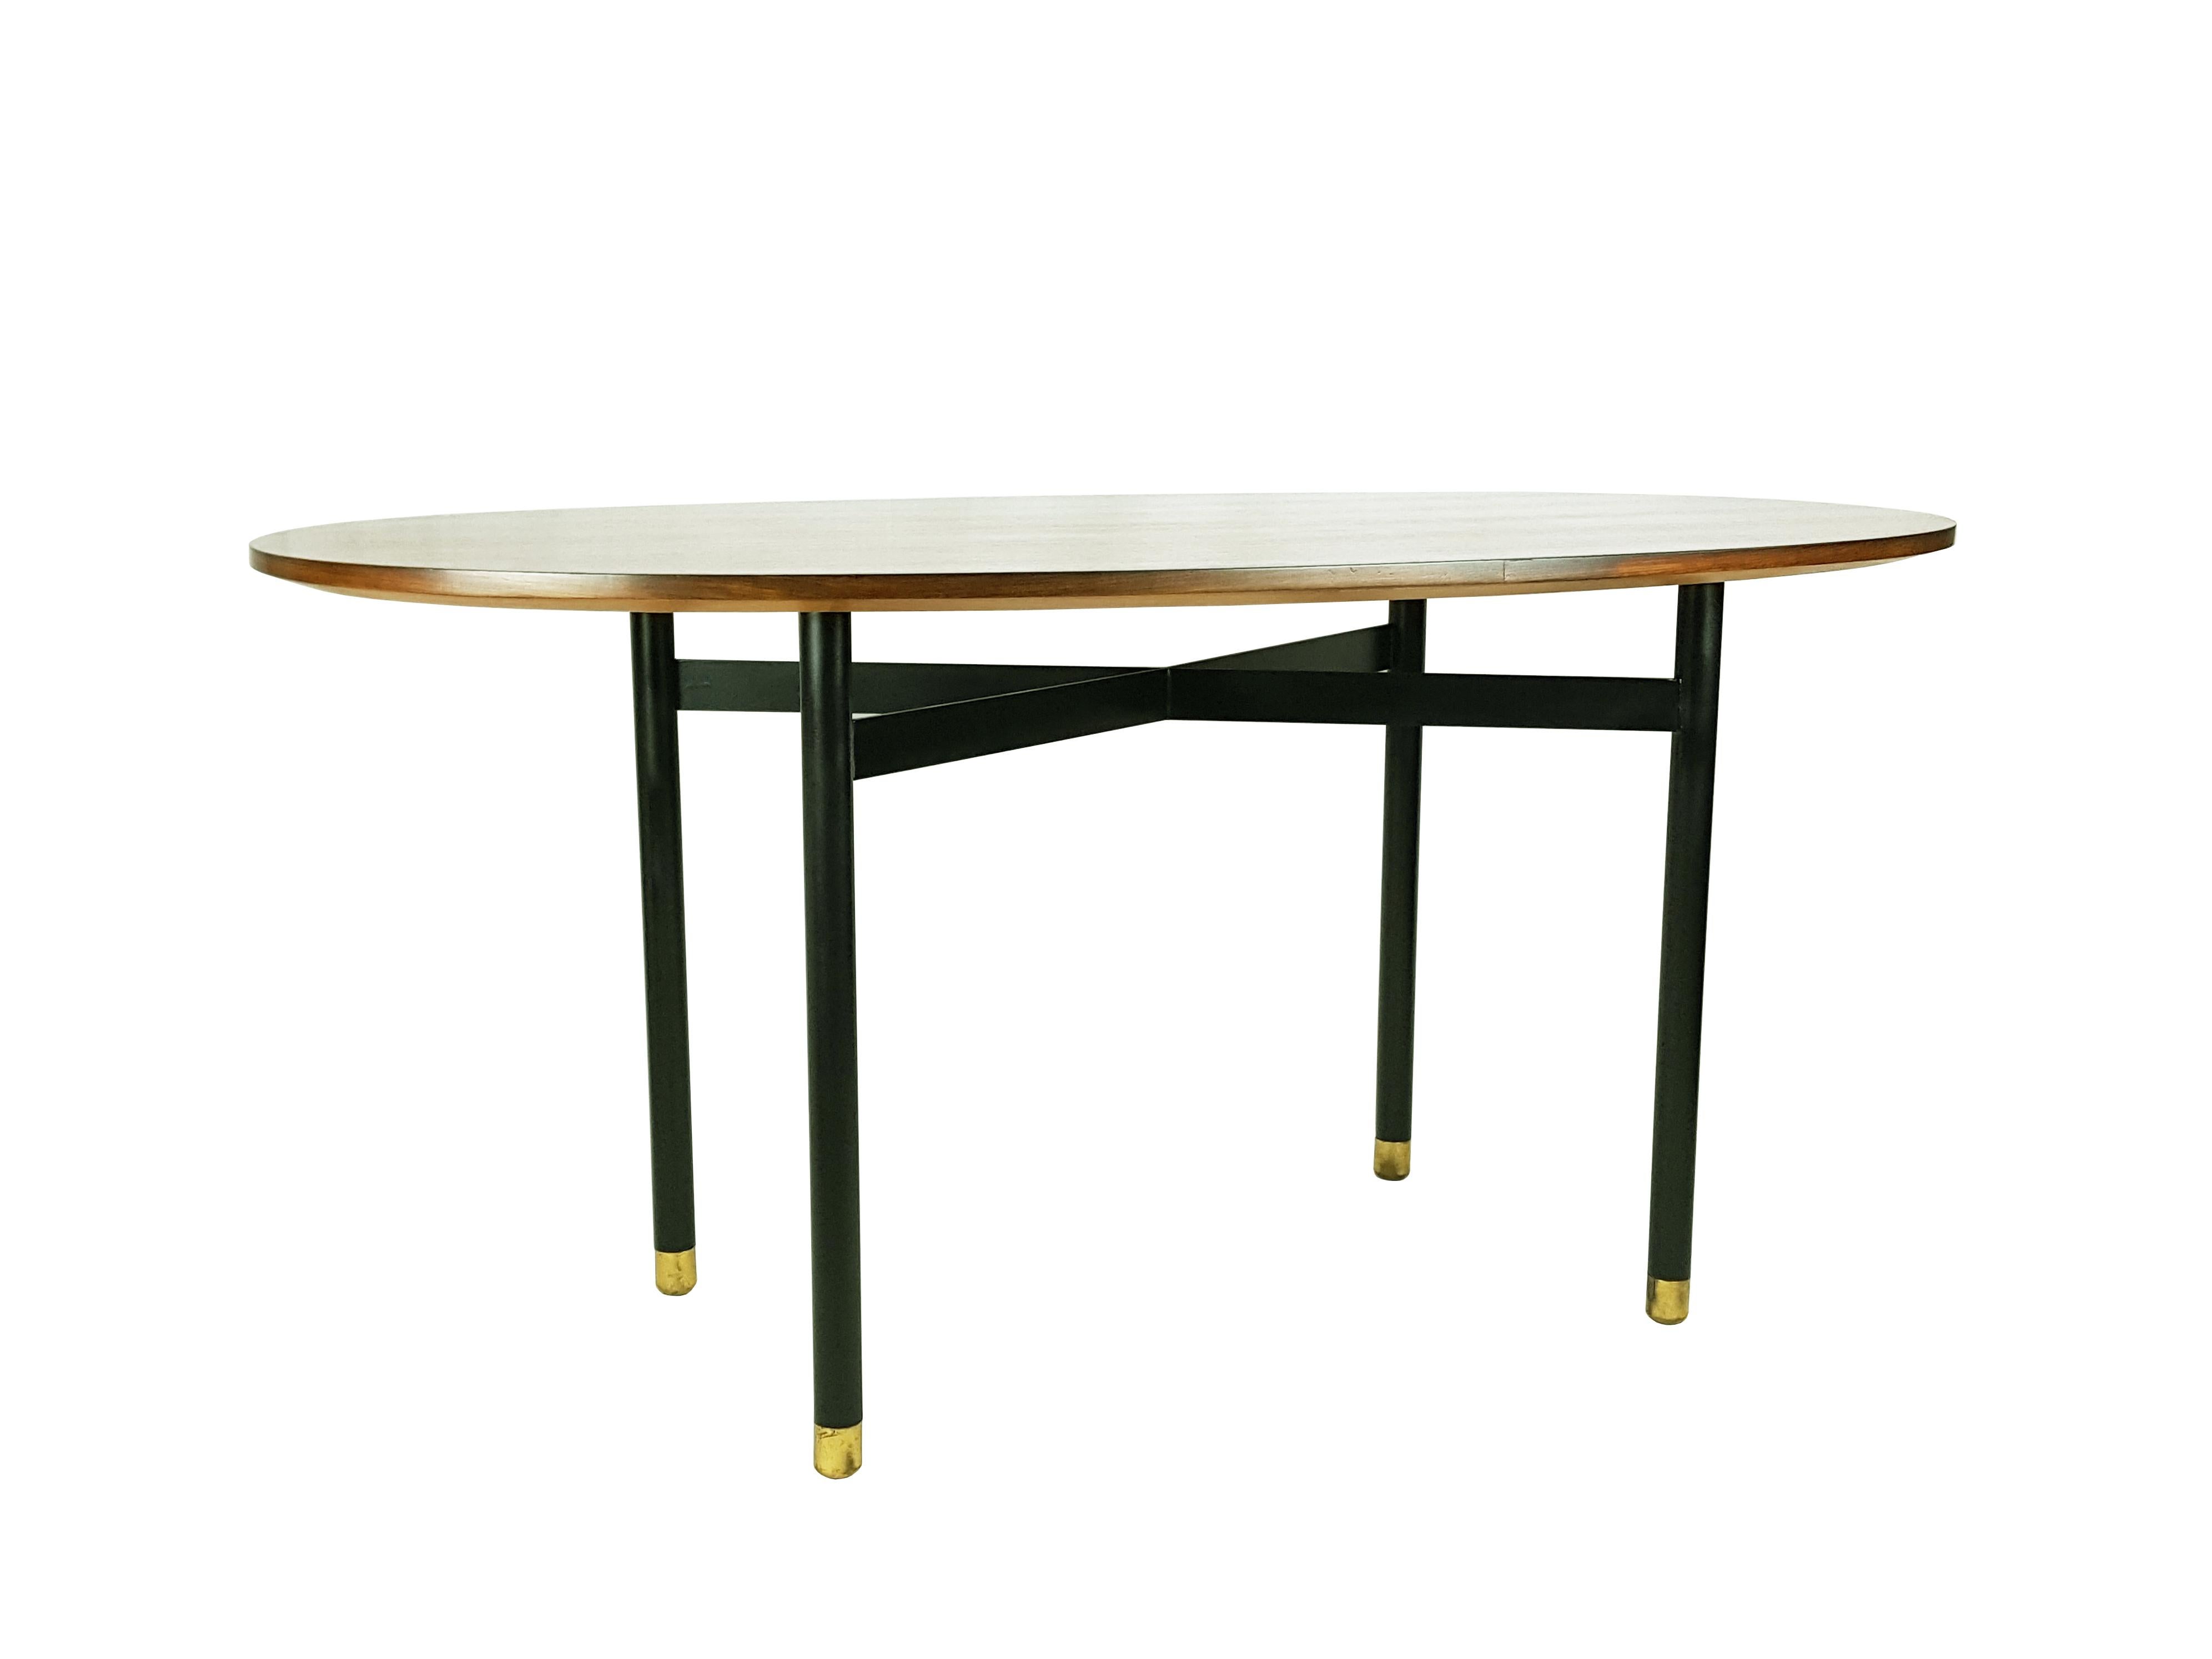 Oval dining table ideal for 4/6 persons. Table top in wood, base in black painted metal, shaped feet in brass. Very good condition: Top and metal base have been restored.